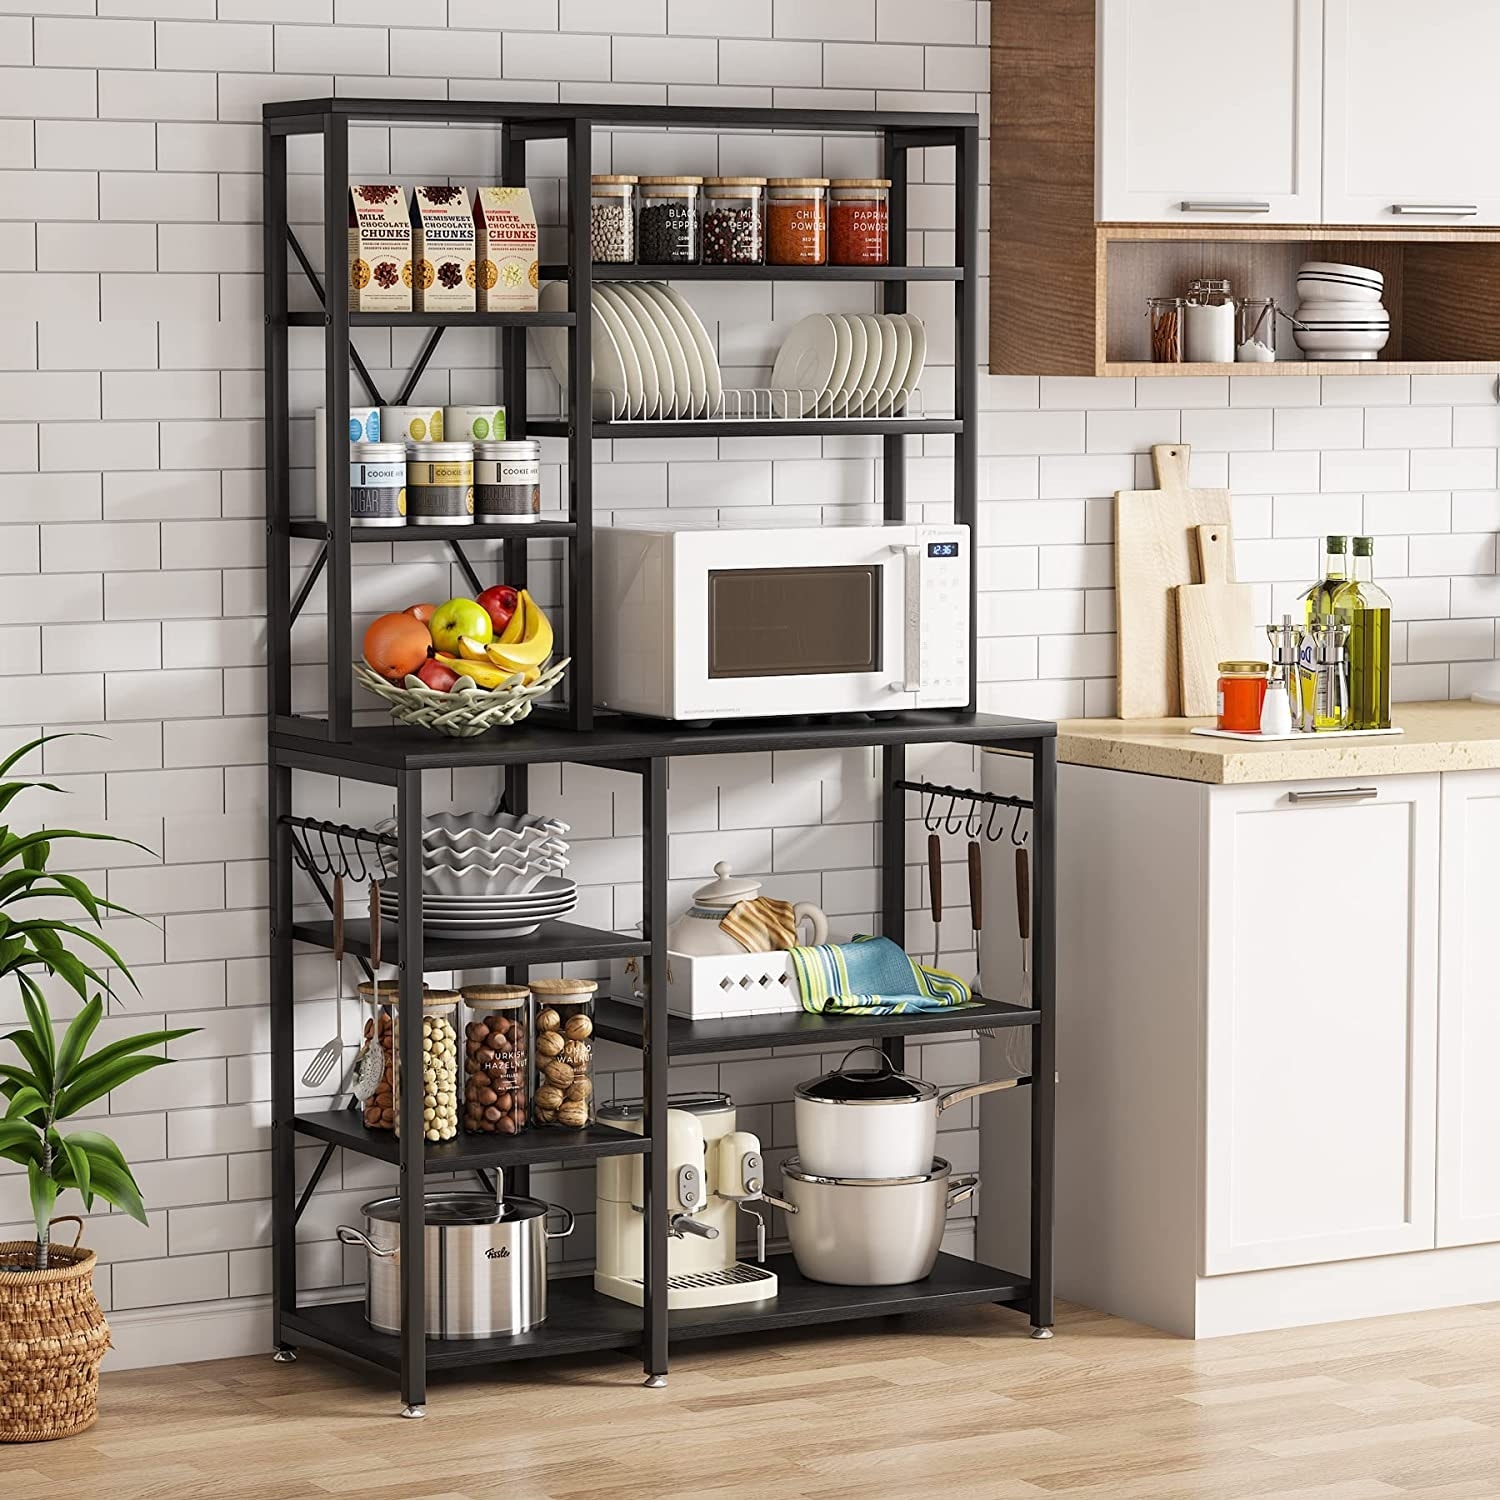 https://ak1.ostkcdn.com/images/products/is/images/direct/48ff44746eed3238c3cbace1babcc326fd36dff3/10-Tiers-Kitchen-Bakers-Rack%2C-Floor-Standing-Kitchen-Utility-Storage-Shelf%2C-Microwave-Oven-Stand-with-10-S-Shaped-Hooks.jpg